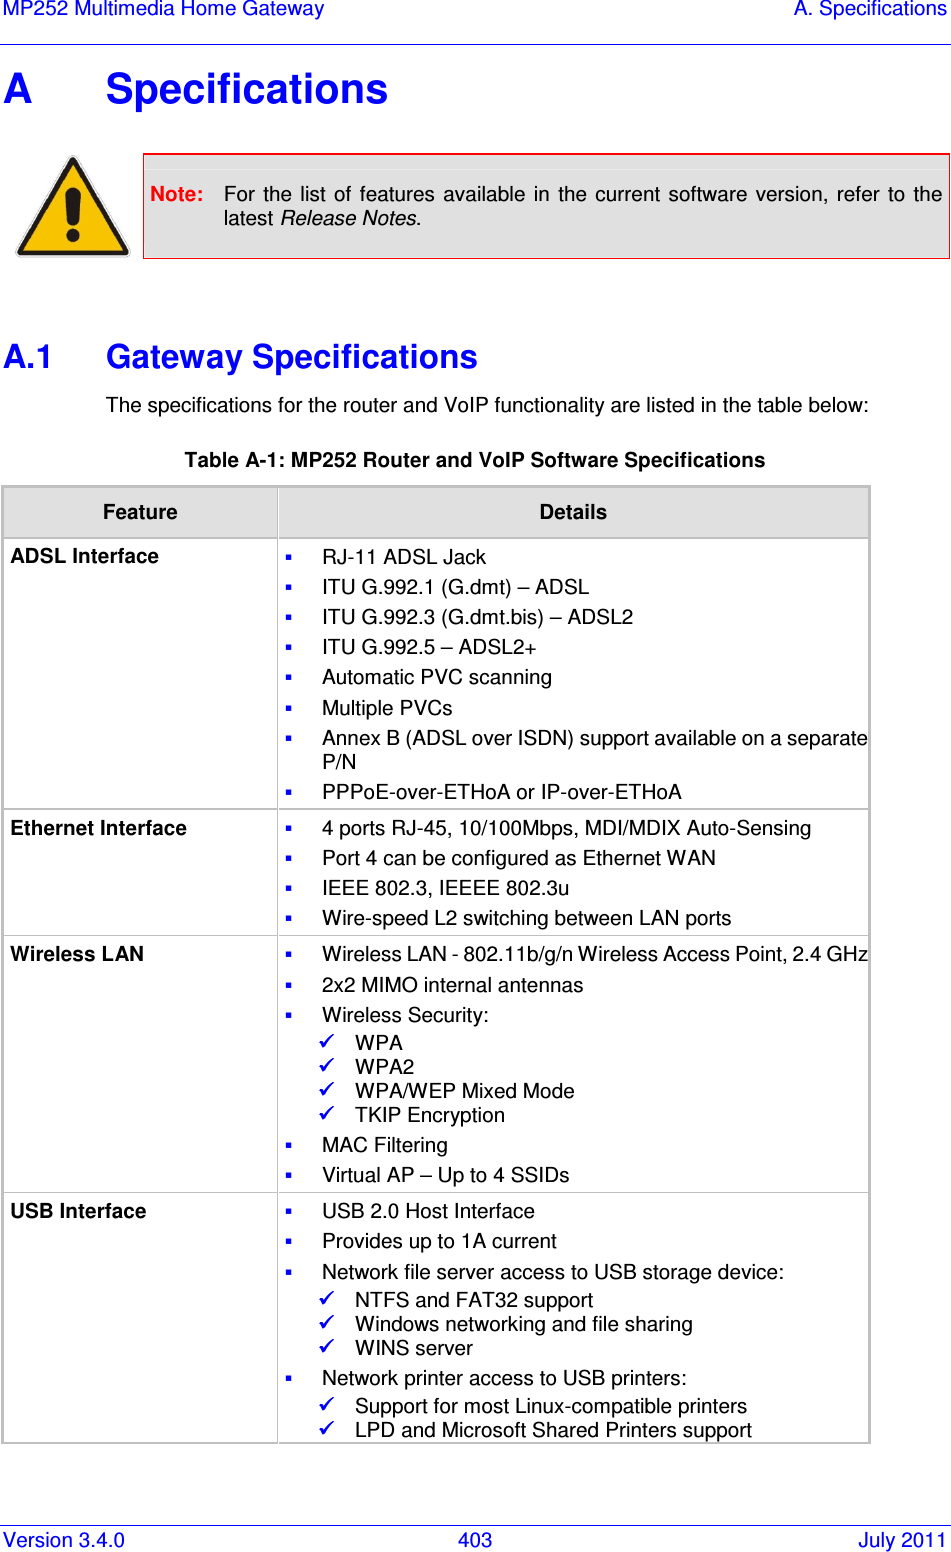 Version 3.4.0  403  July 2011 MP252 Multimedia Home Gateway  A. Specifications  A  Specifications    Note:  For  the list  of features available in  the  current software  version, refer to  the latest Release Notes.   A.1  Gateway Specifications The specifications for the router and VoIP functionality are listed in the table below: Table A-1: MP252 Router and VoIP Software Specifications Feature  Details ADSL Interface  RJ-11 ADSL Jack  ITU G.992.1 (G.dmt) – ADSL  ITU G.992.3 (G.dmt.bis) – ADSL2  ITU G.992.5 – ADSL2+  Automatic PVC scanning  Multiple PVCs  Annex B (ADSL over ISDN) support available on a separate P/N  PPPoE-over-ETHoA or IP-over-ETHoA Ethernet Interface  4 ports RJ-45, 10/100Mbps, MDI/MDIX Auto-Sensing  Port 4 can be configured as Ethernet WAN  IEEE 802.3, IEEEE 802.3u  Wire-speed L2 switching between LAN ports Wireless LAN  Wireless LAN - 802.11b/g/n Wireless Access Point, 2.4 GHz 2x2 MIMO internal antennas  Wireless Security:  WPA  WPA2  WPA/WEP Mixed Mode  TKIP Encryption  MAC Filtering  Virtual AP – Up to 4 SSIDs USB Interface  USB 2.0 Host Interface  Provides up to 1A current  Network file server access to USB storage device:  NTFS and FAT32 support  Windows networking and file sharing  WINS server  Network printer access to USB printers:  Support for most Linux-compatible printers  LPD and Microsoft Shared Printers support 